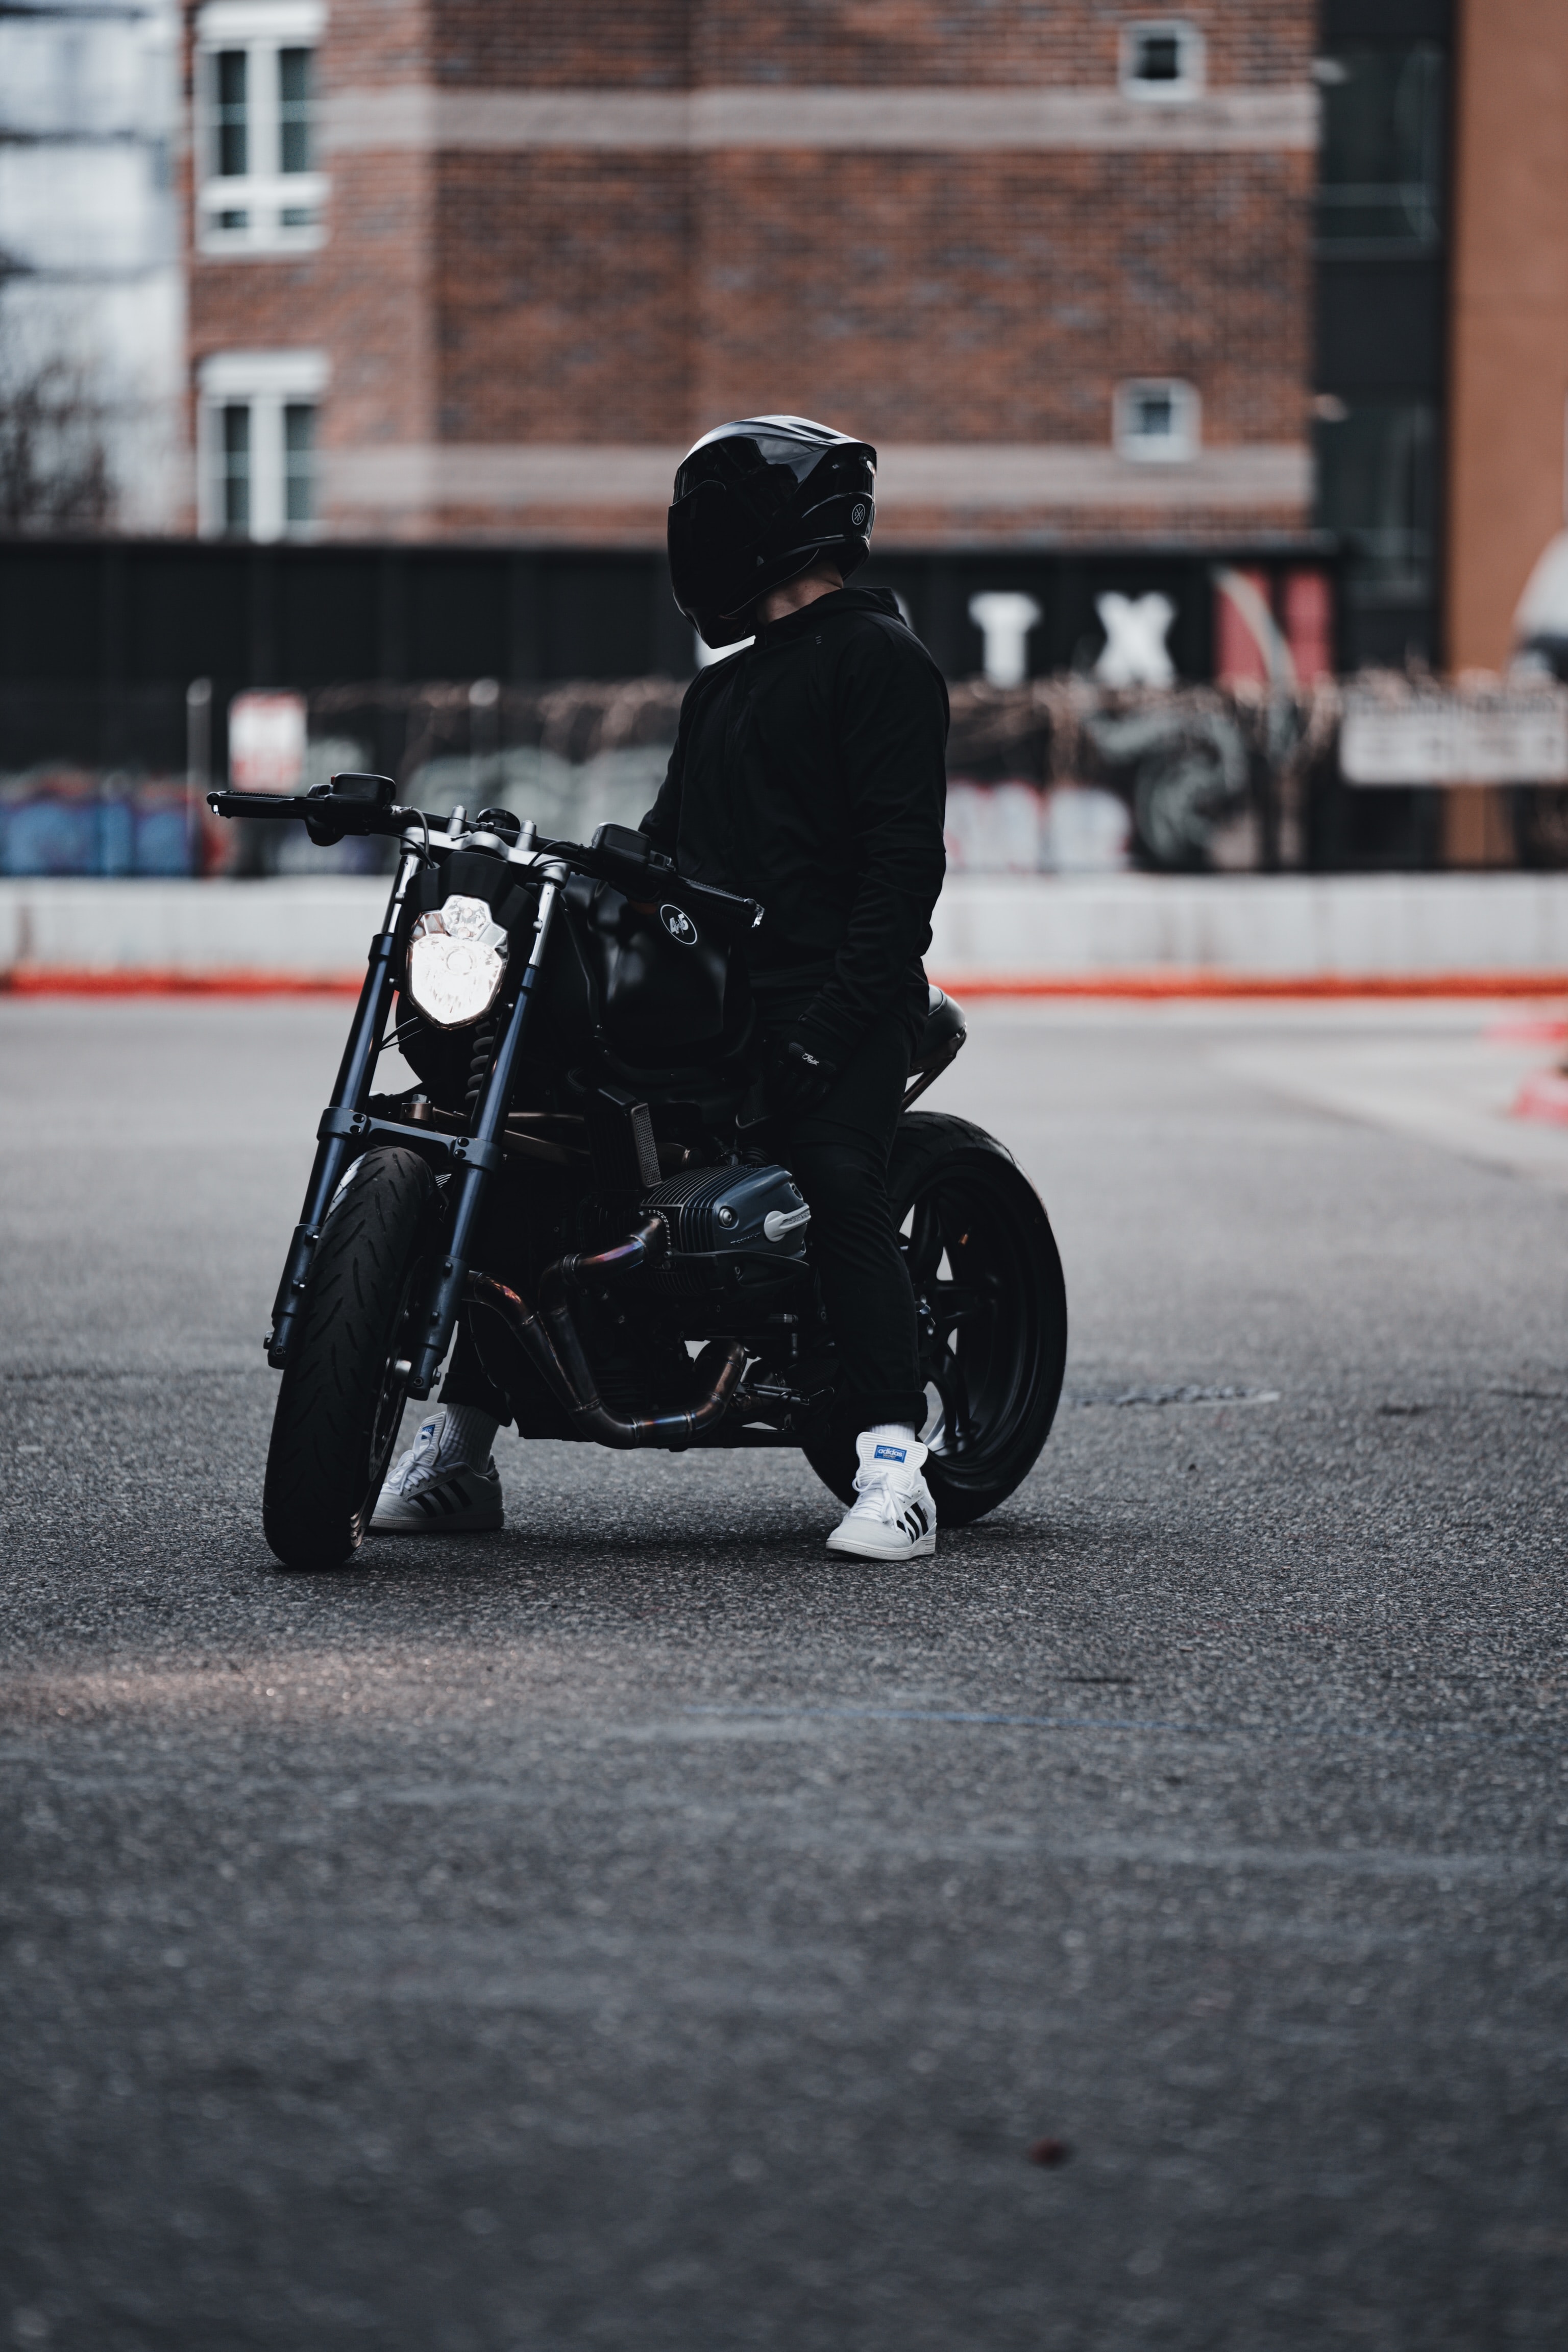 Cool Backgrounds  Motorcyclist